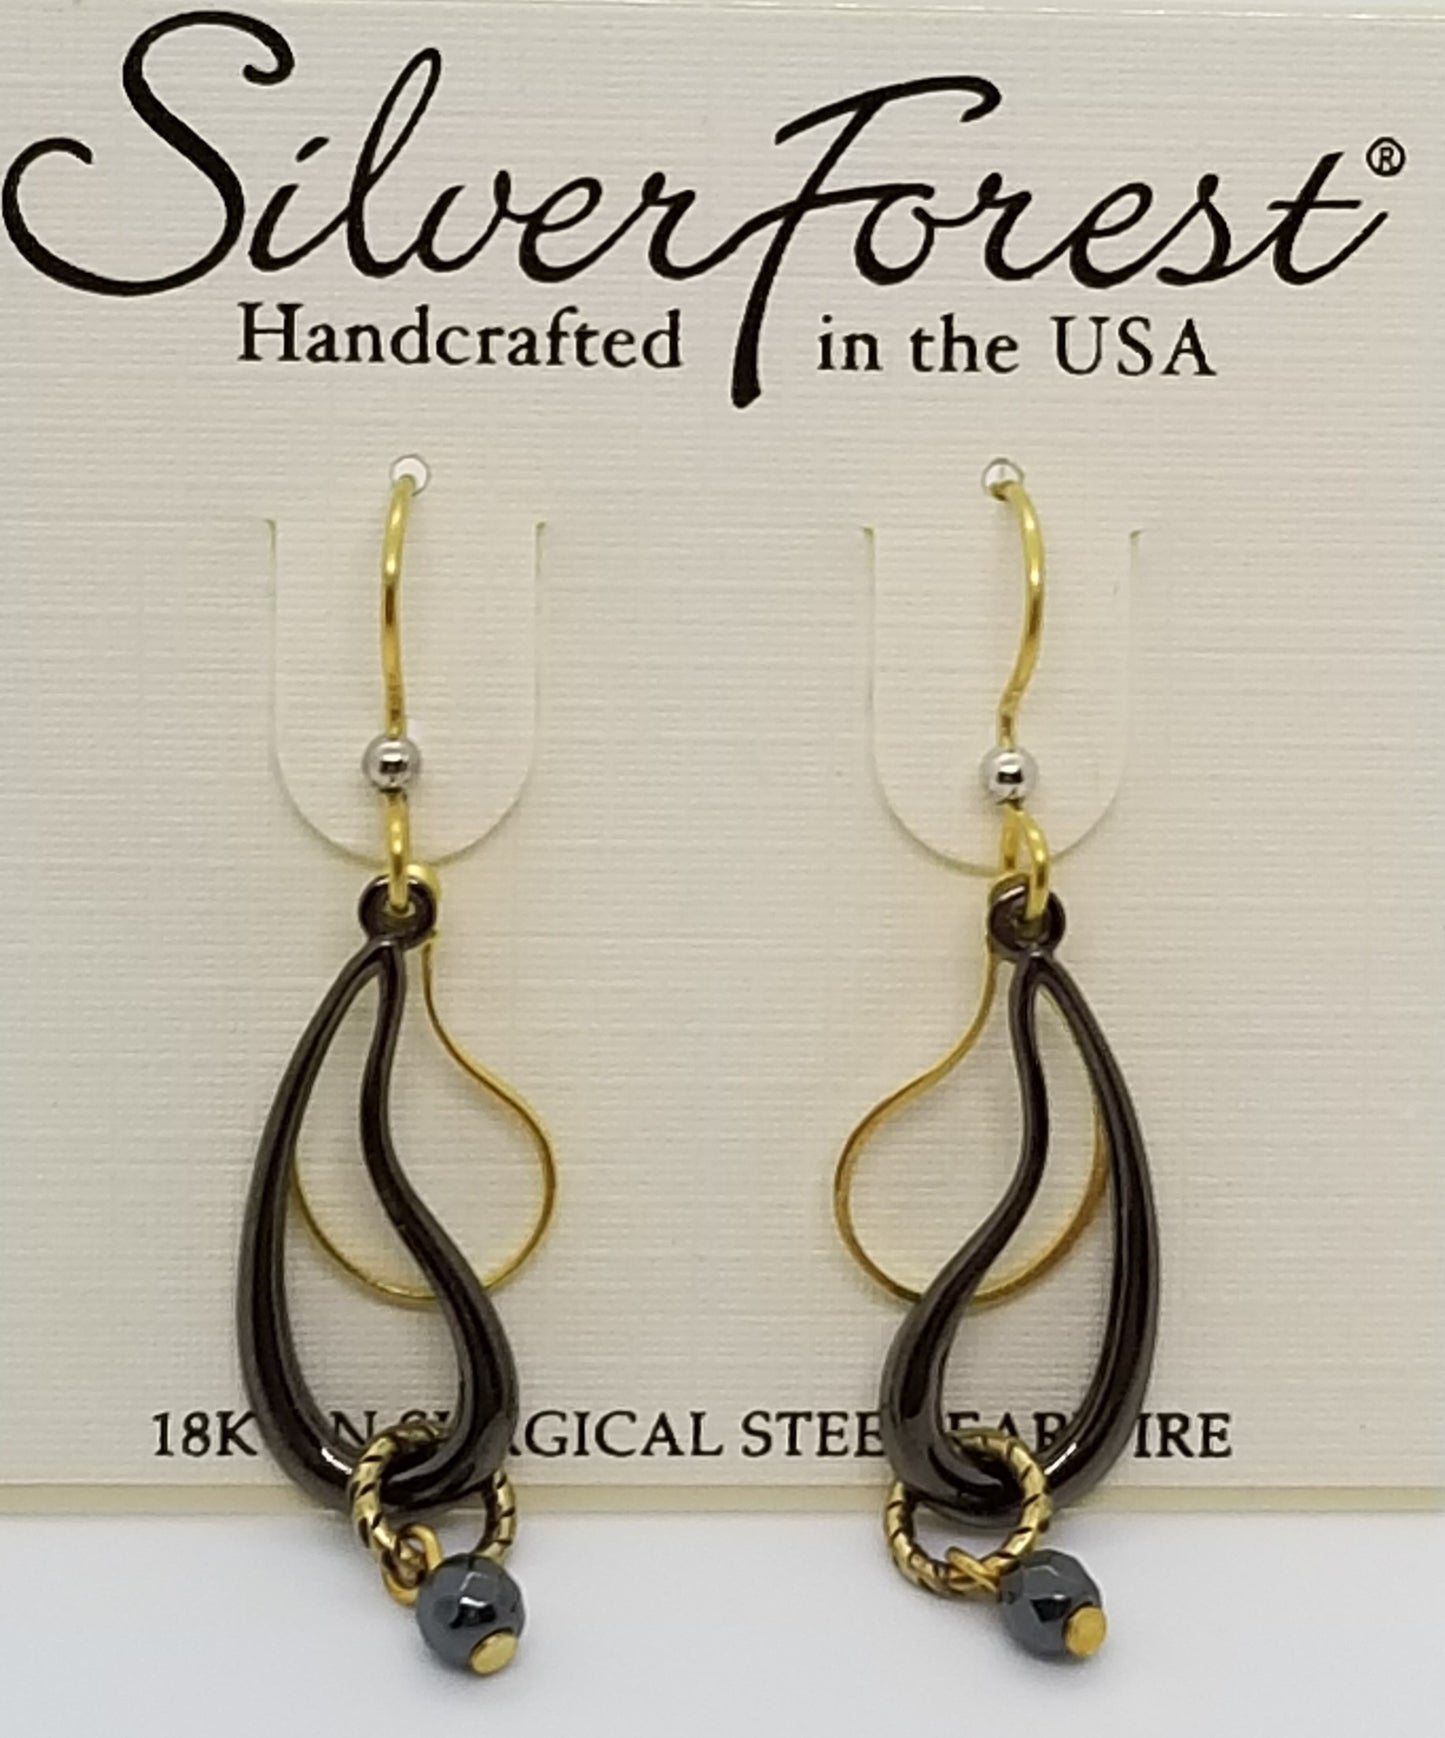 Silver forest 18kt gold plated surgical steel earrings